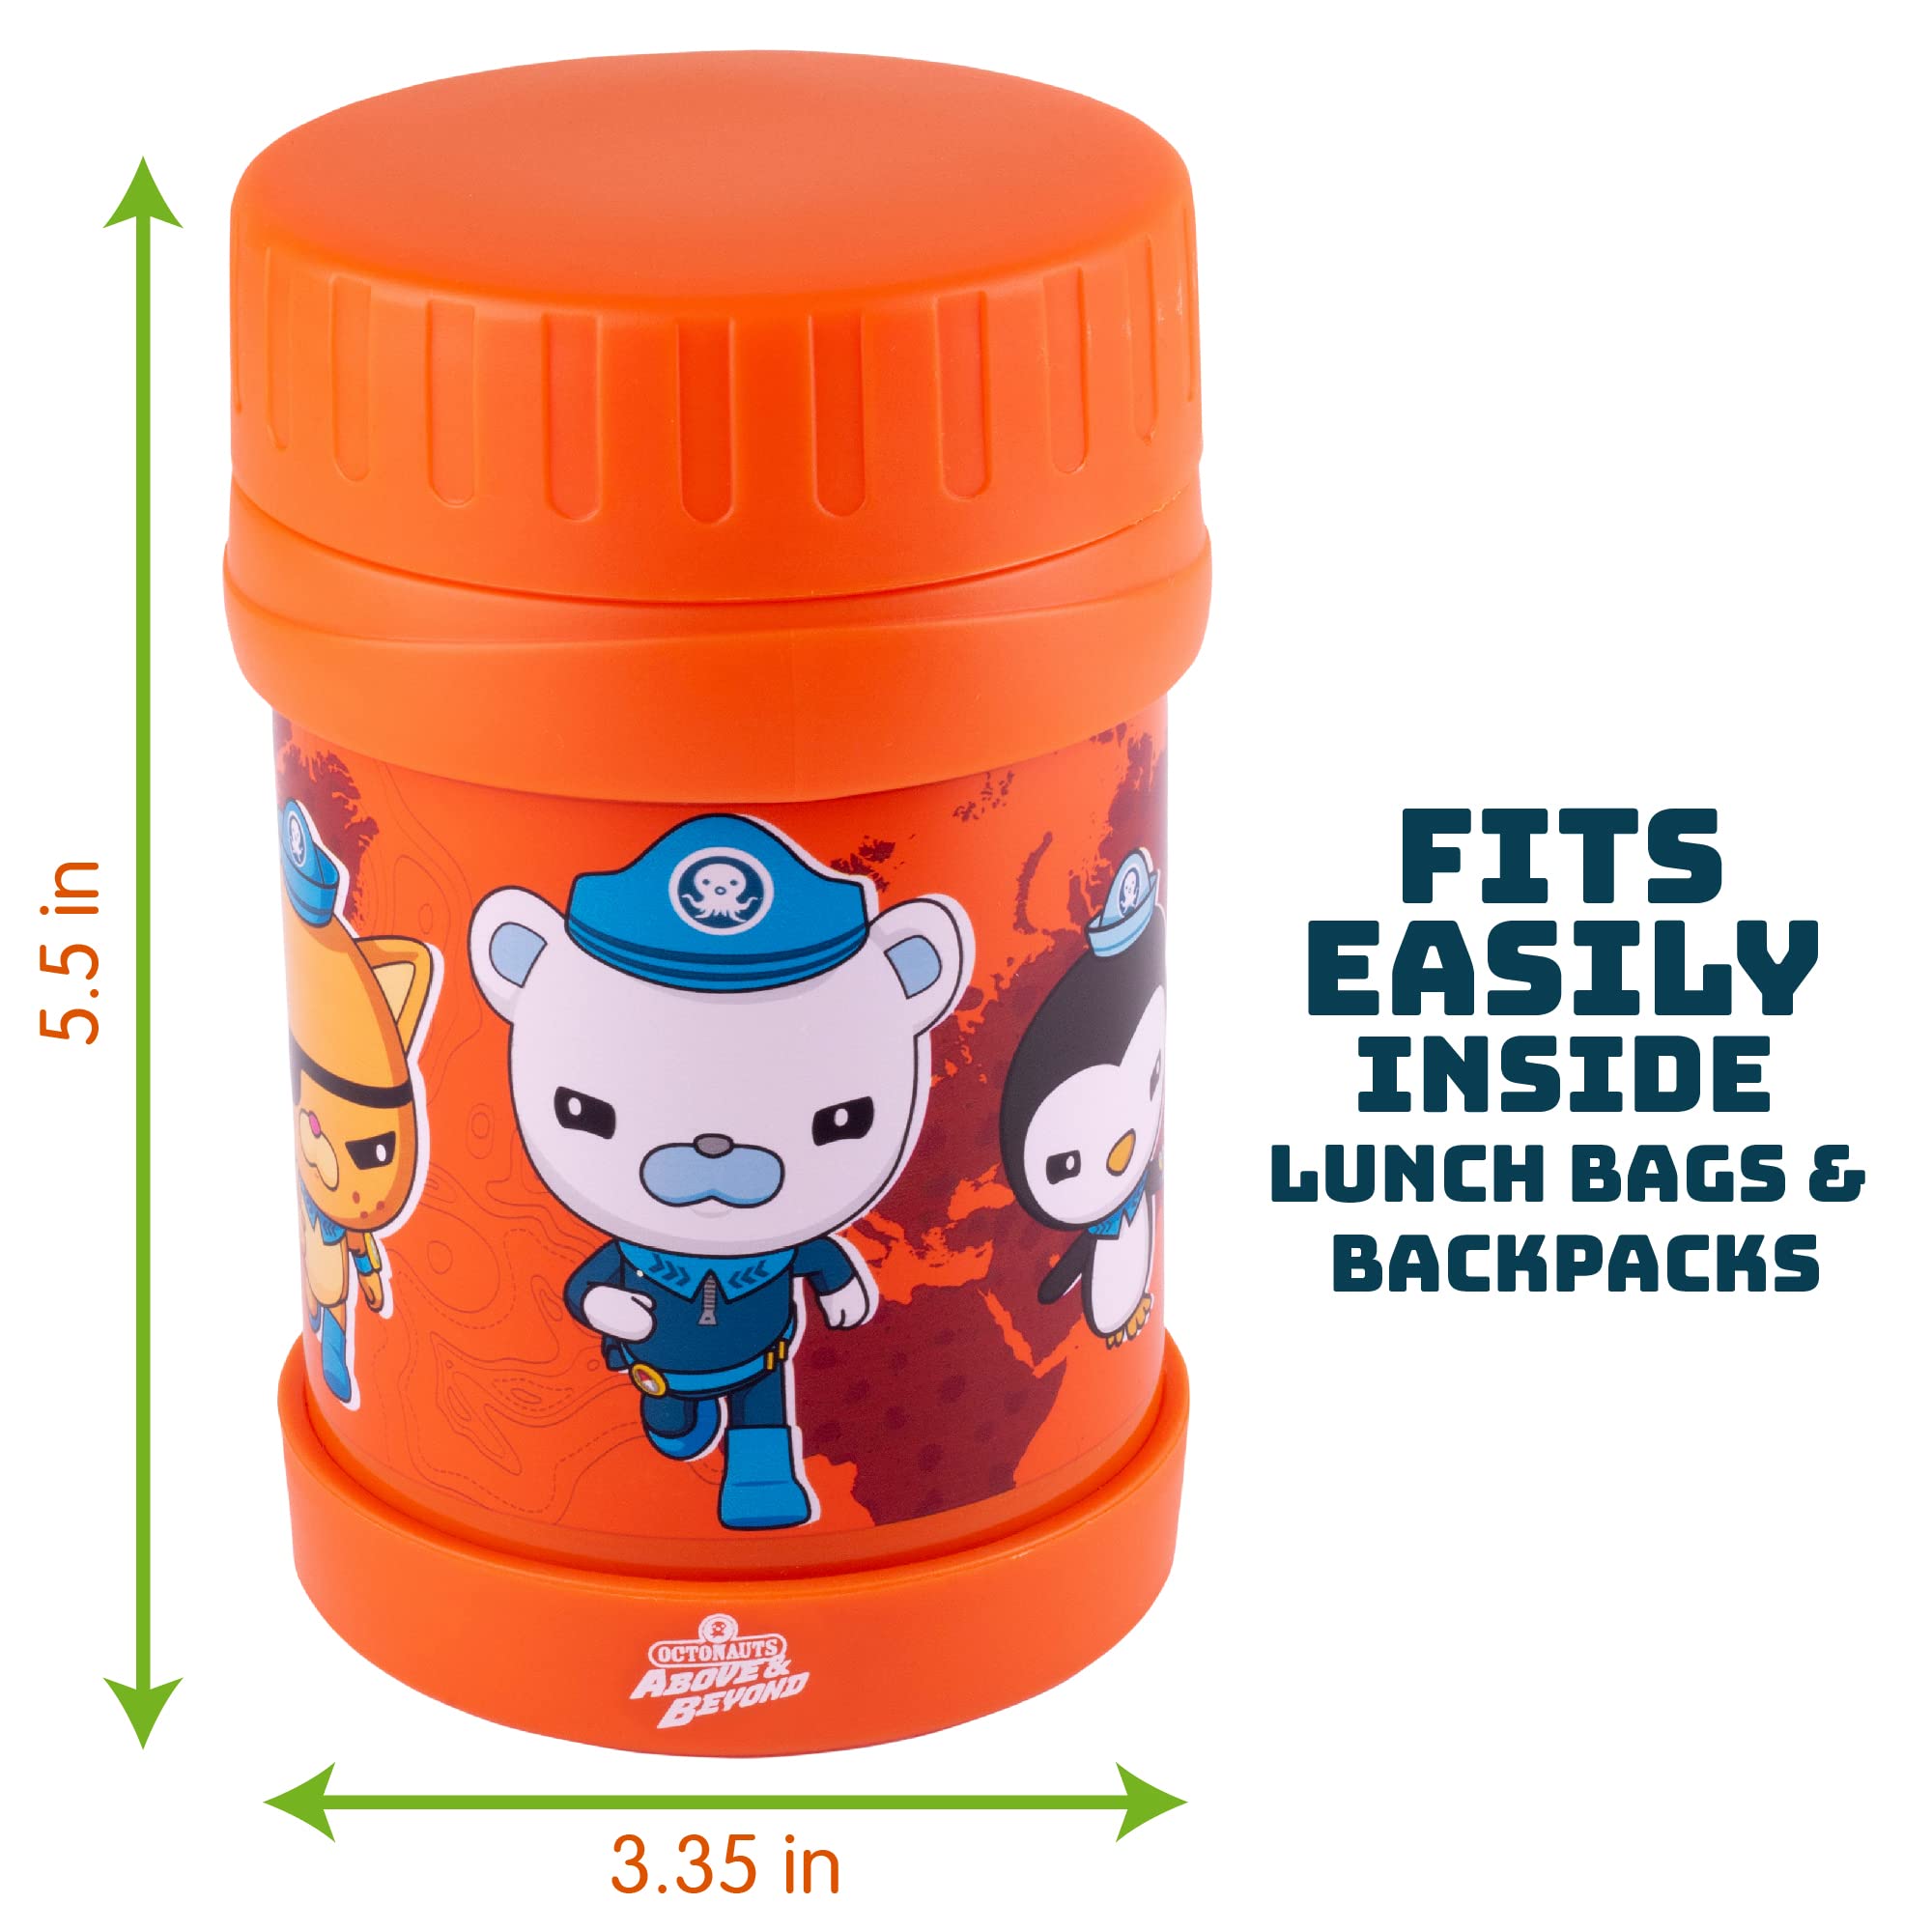 Octonauts Above & Beyond Stainless Steel Vacuum Insulated 13 oz Food Jar for Kids, Orange - Leak-Proof Container Keeps Meals, Liquids, Soups Hot or Cold for Hours - Lunch Boxes & Bags Back to School